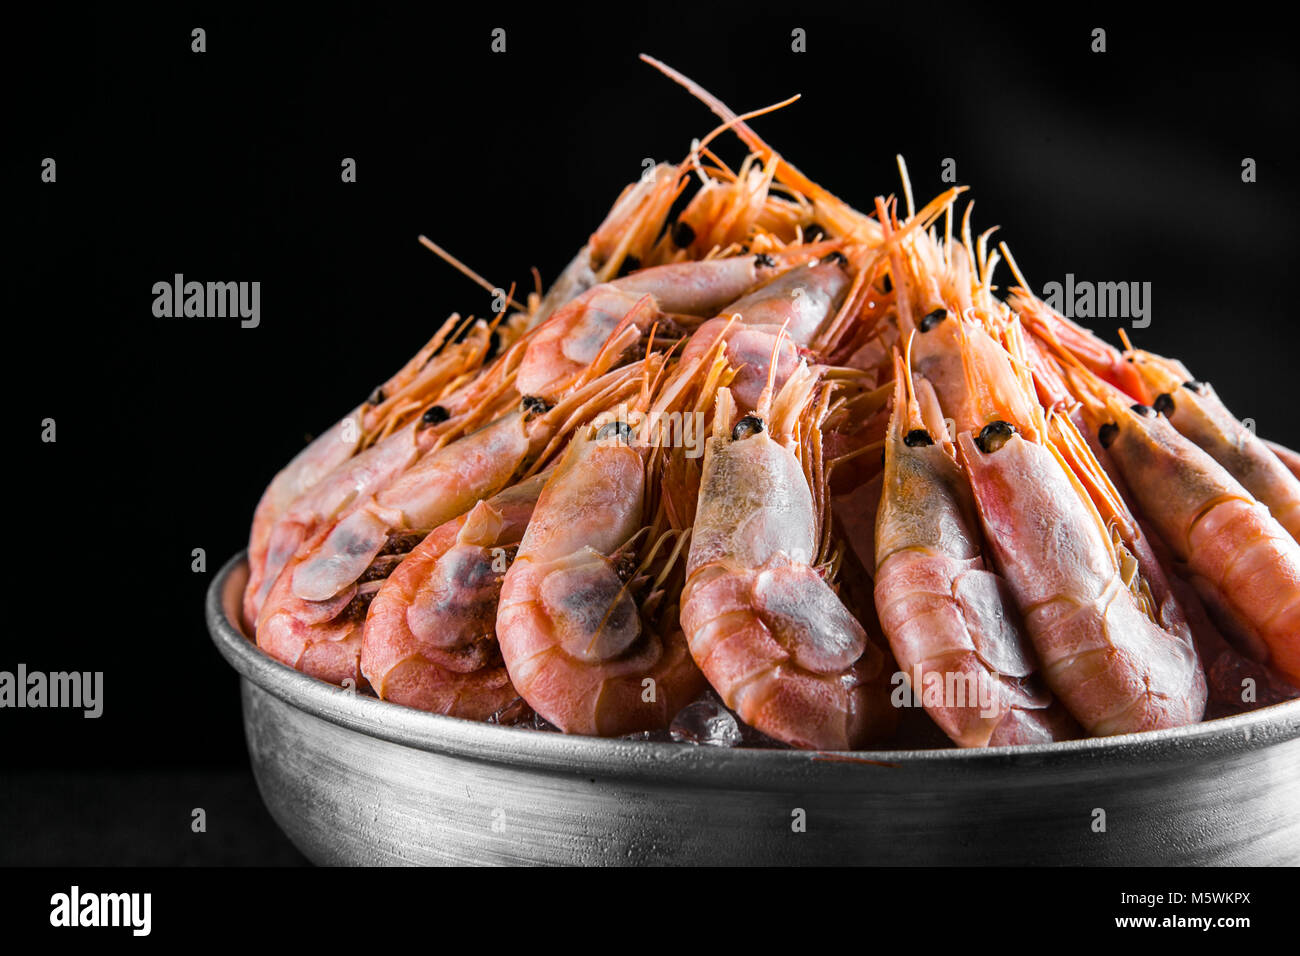 cooked Shrimps in a metal bucket on a dark background Stock Photo